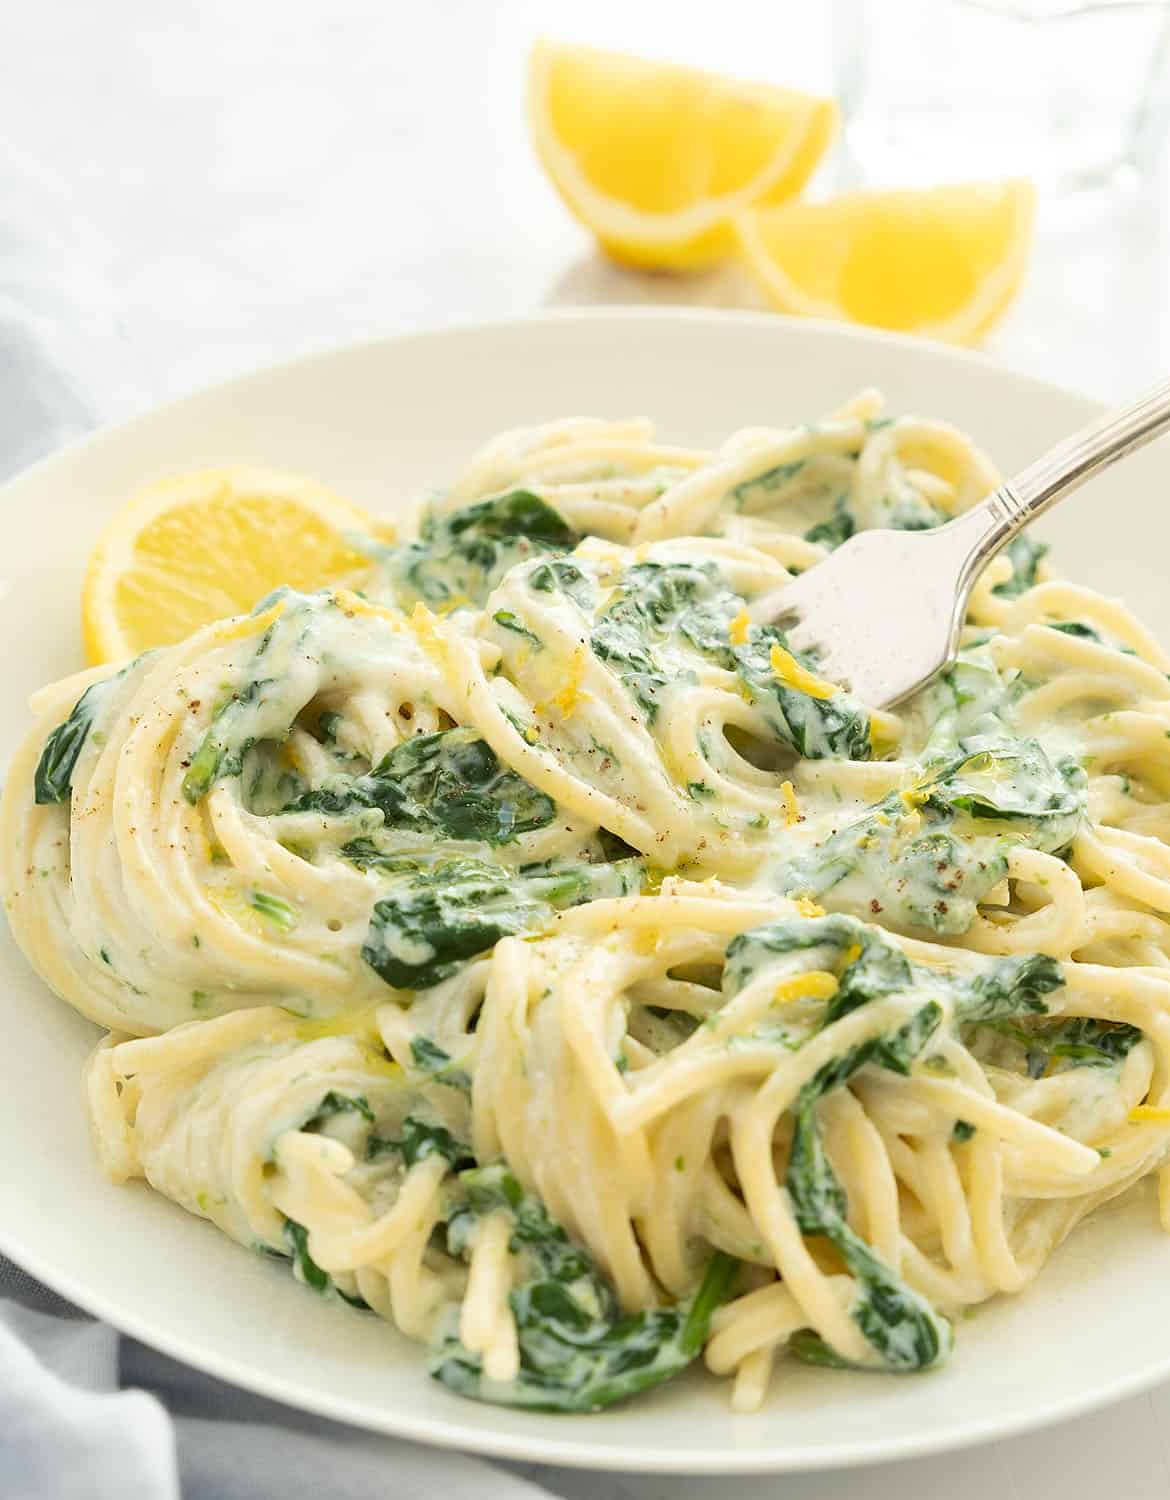 Lemon ricotta pasta with spinach and lemon wedges on a white background.